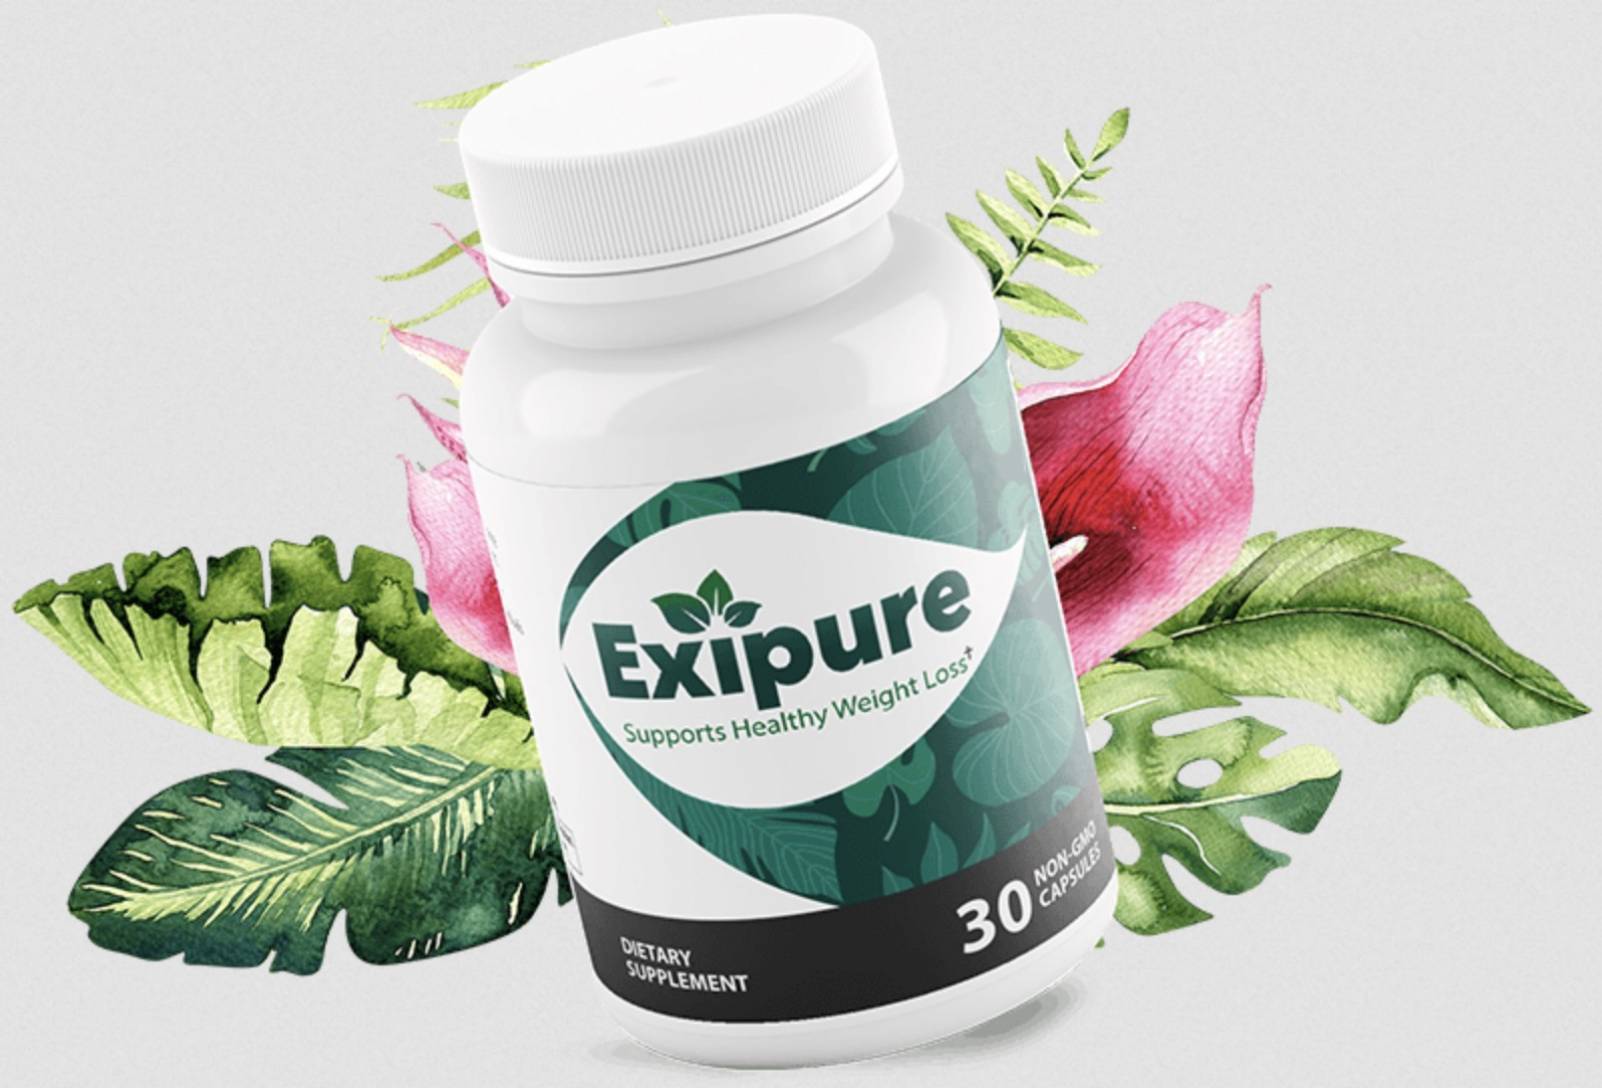 Is Exipure Available In Australia